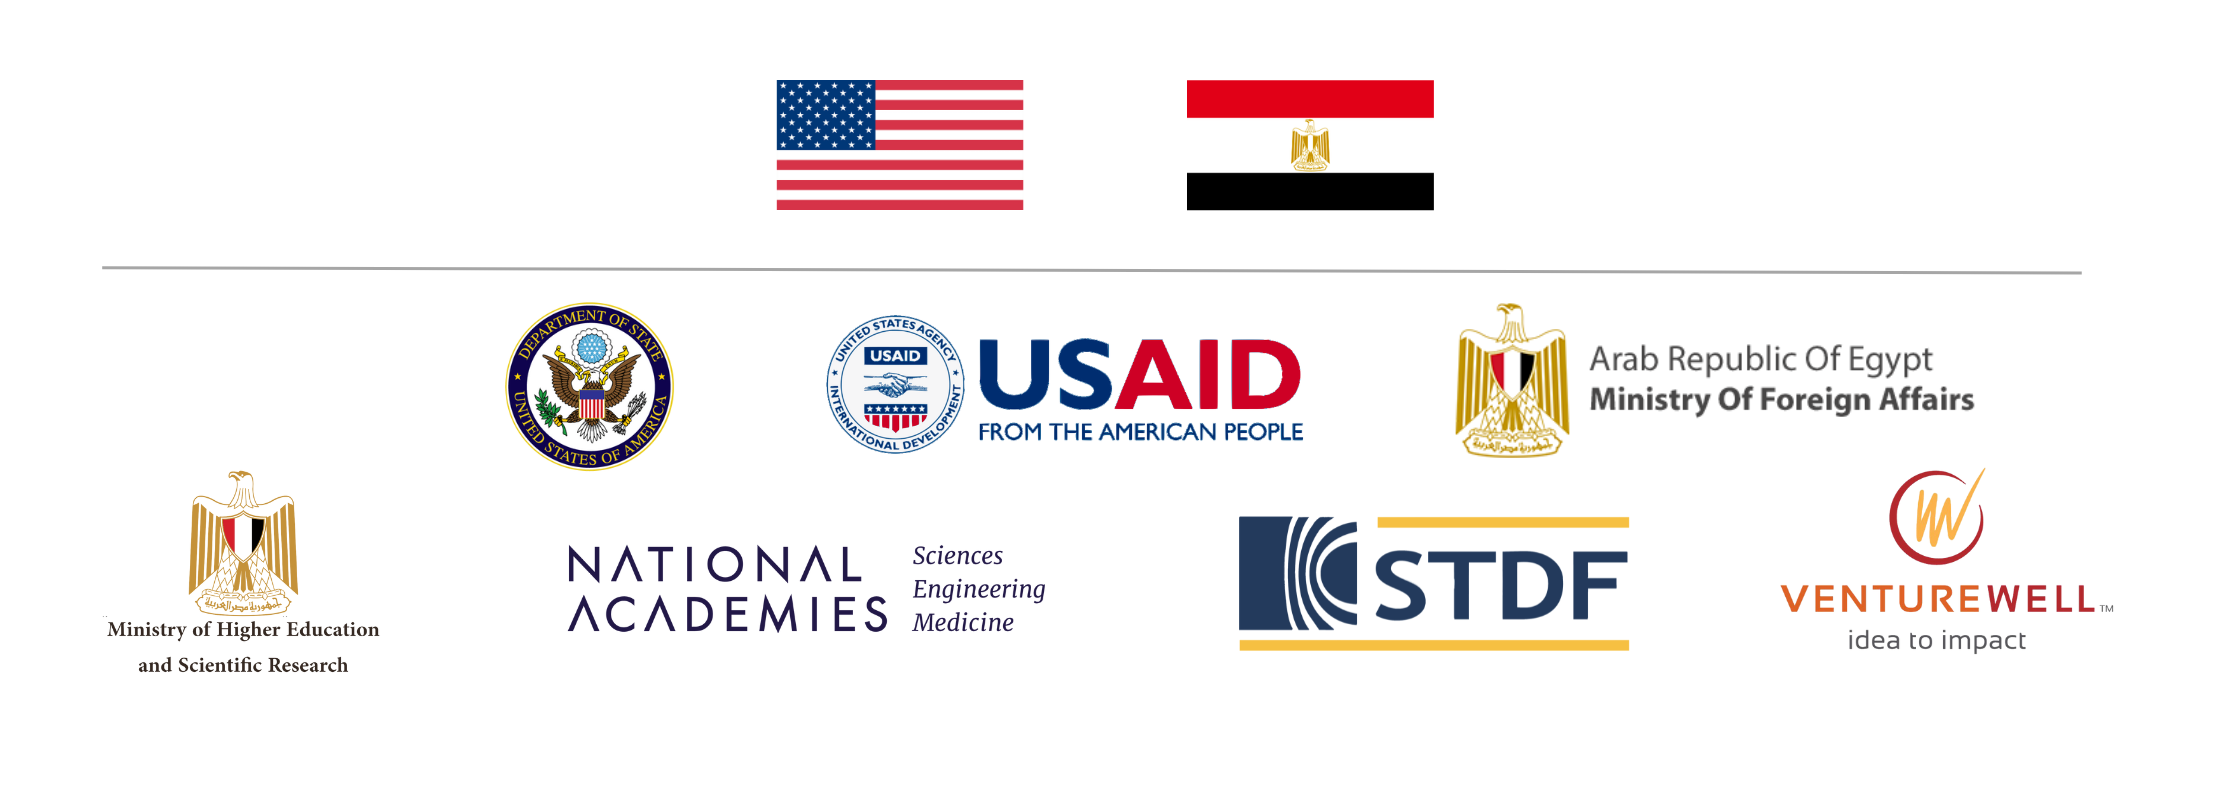 United States and Egypt flags, Innovate Egypt supporter logos: USAID, U.S. Department of State, Arab Republic of Egypt Ministry of Foreign Affairs, Ministry of Higher Education and Research, National Academies, STDF, VentureWell